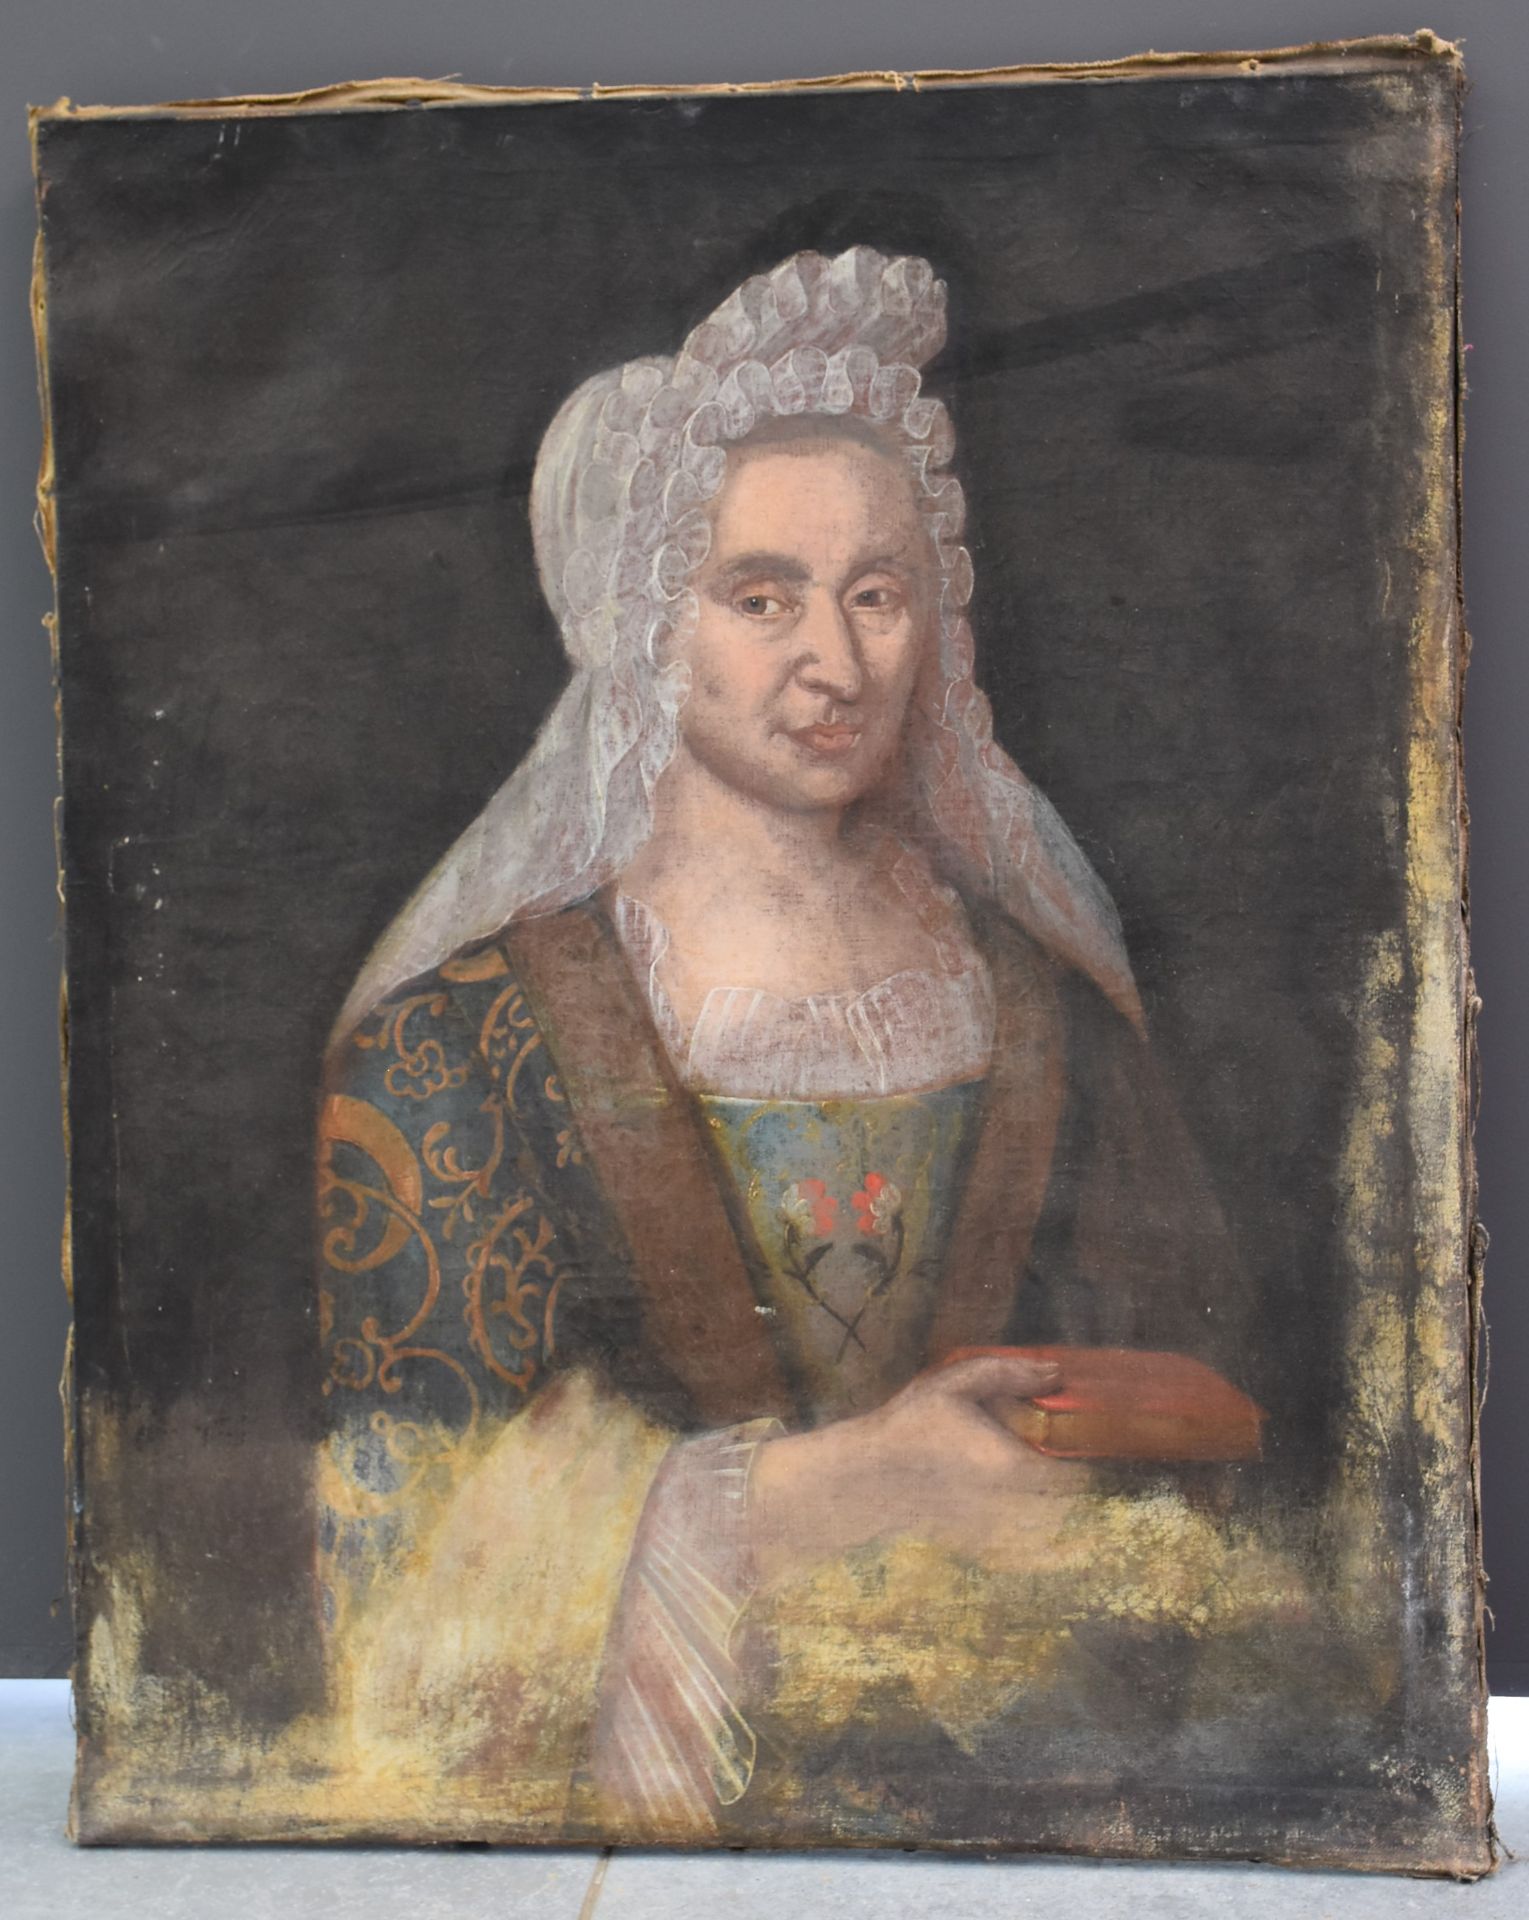 18th century portrait of the widow Pinondel, mother of 15 children, aged 49 and a half in the year 1